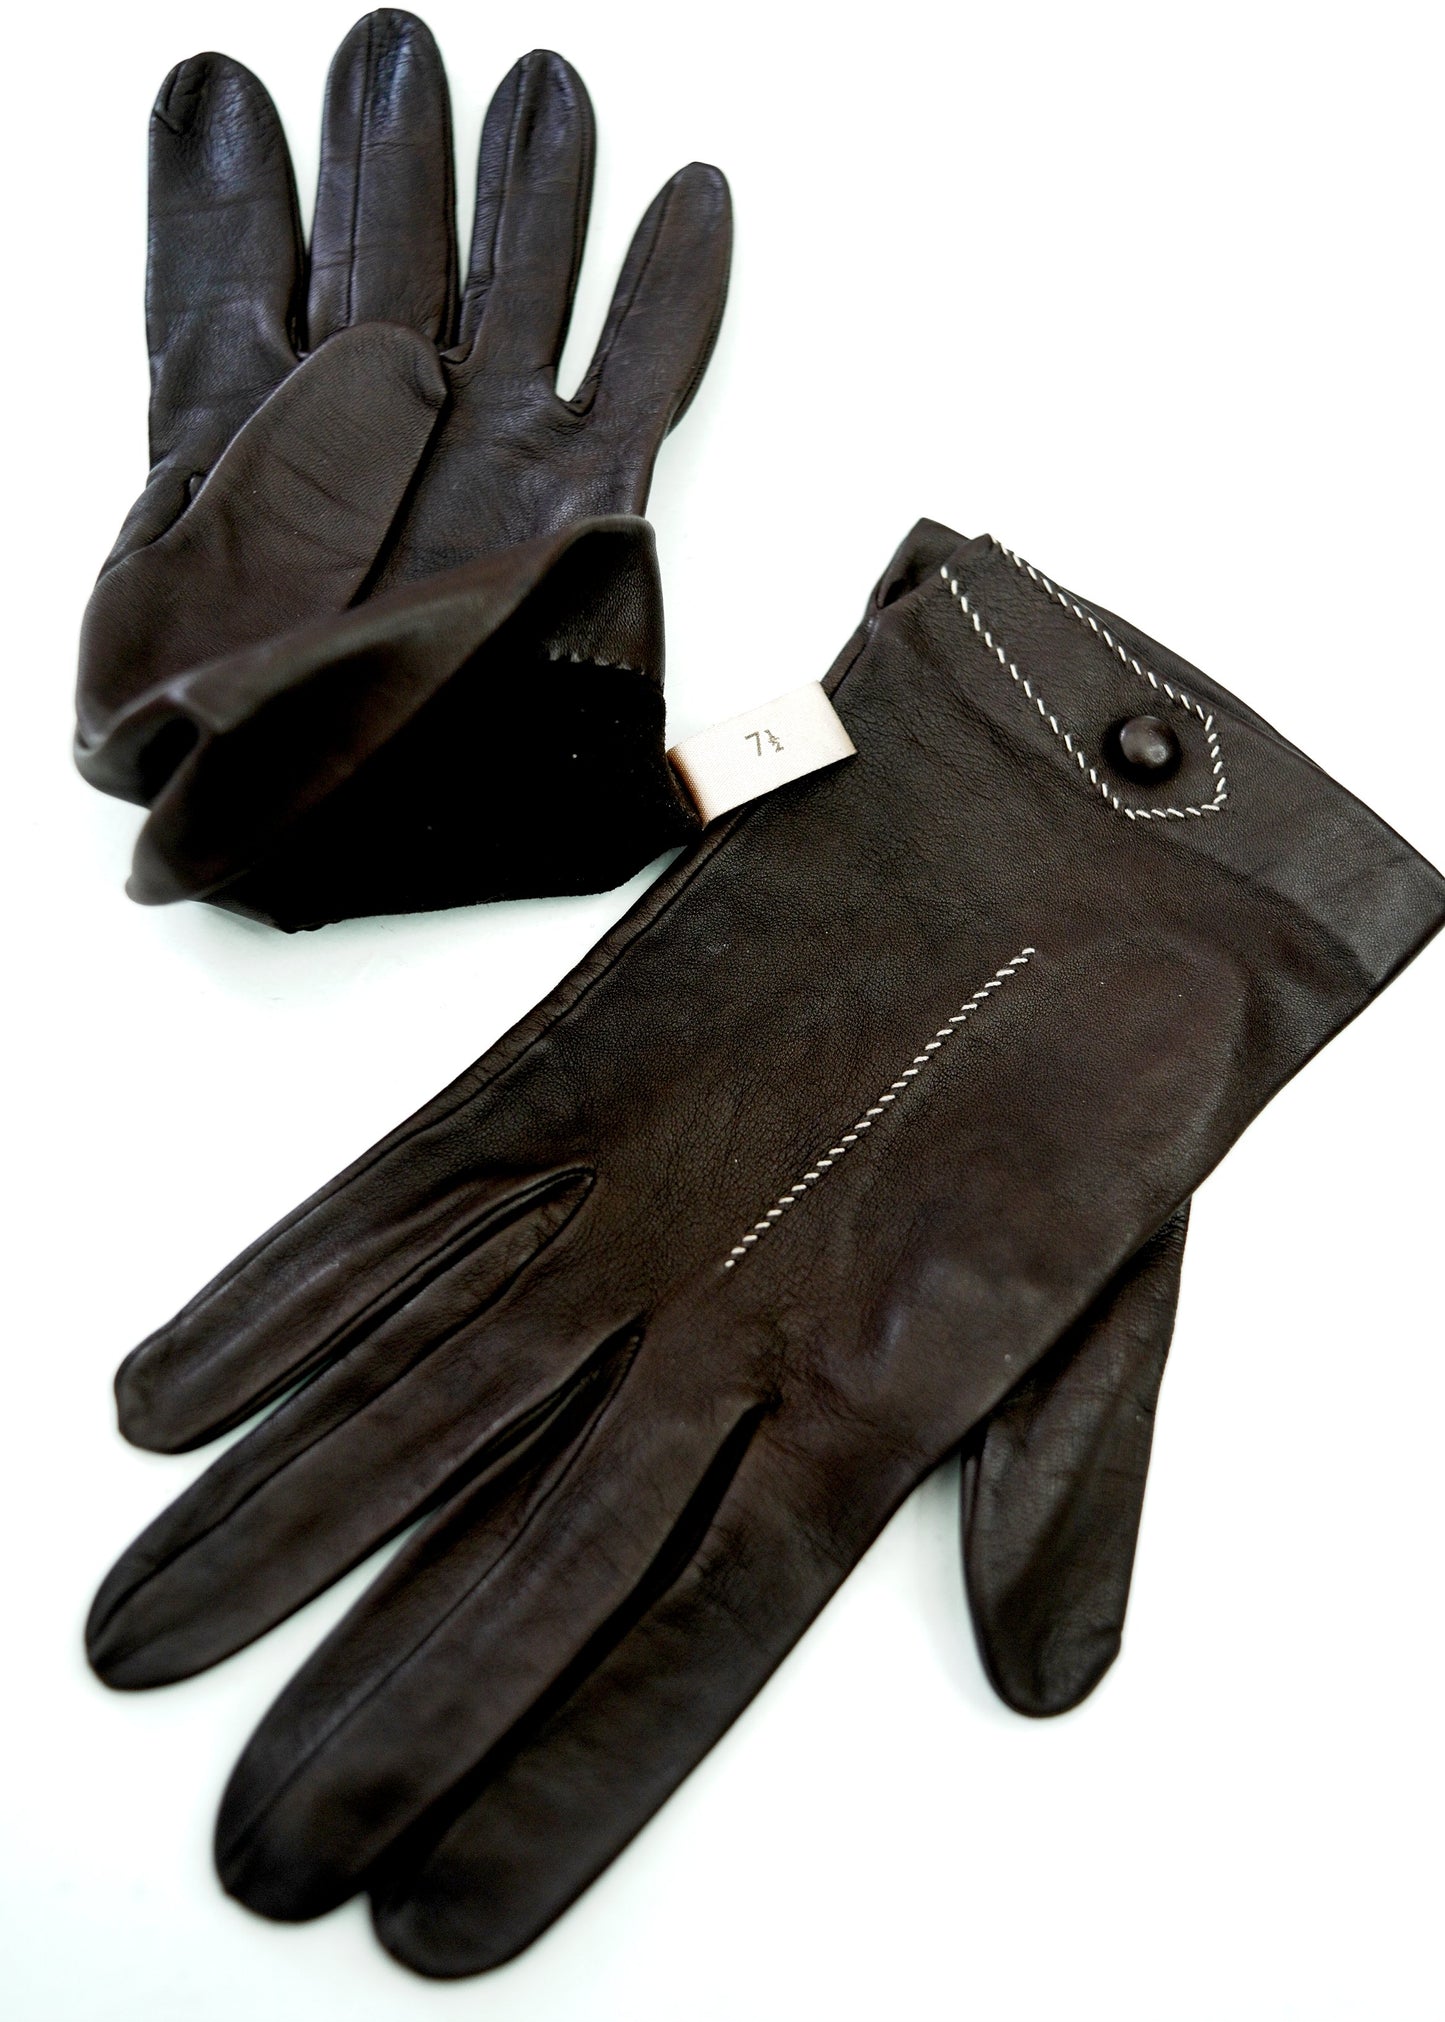 Vintage Brown Leather Gloves with Contrast Stitch Detail